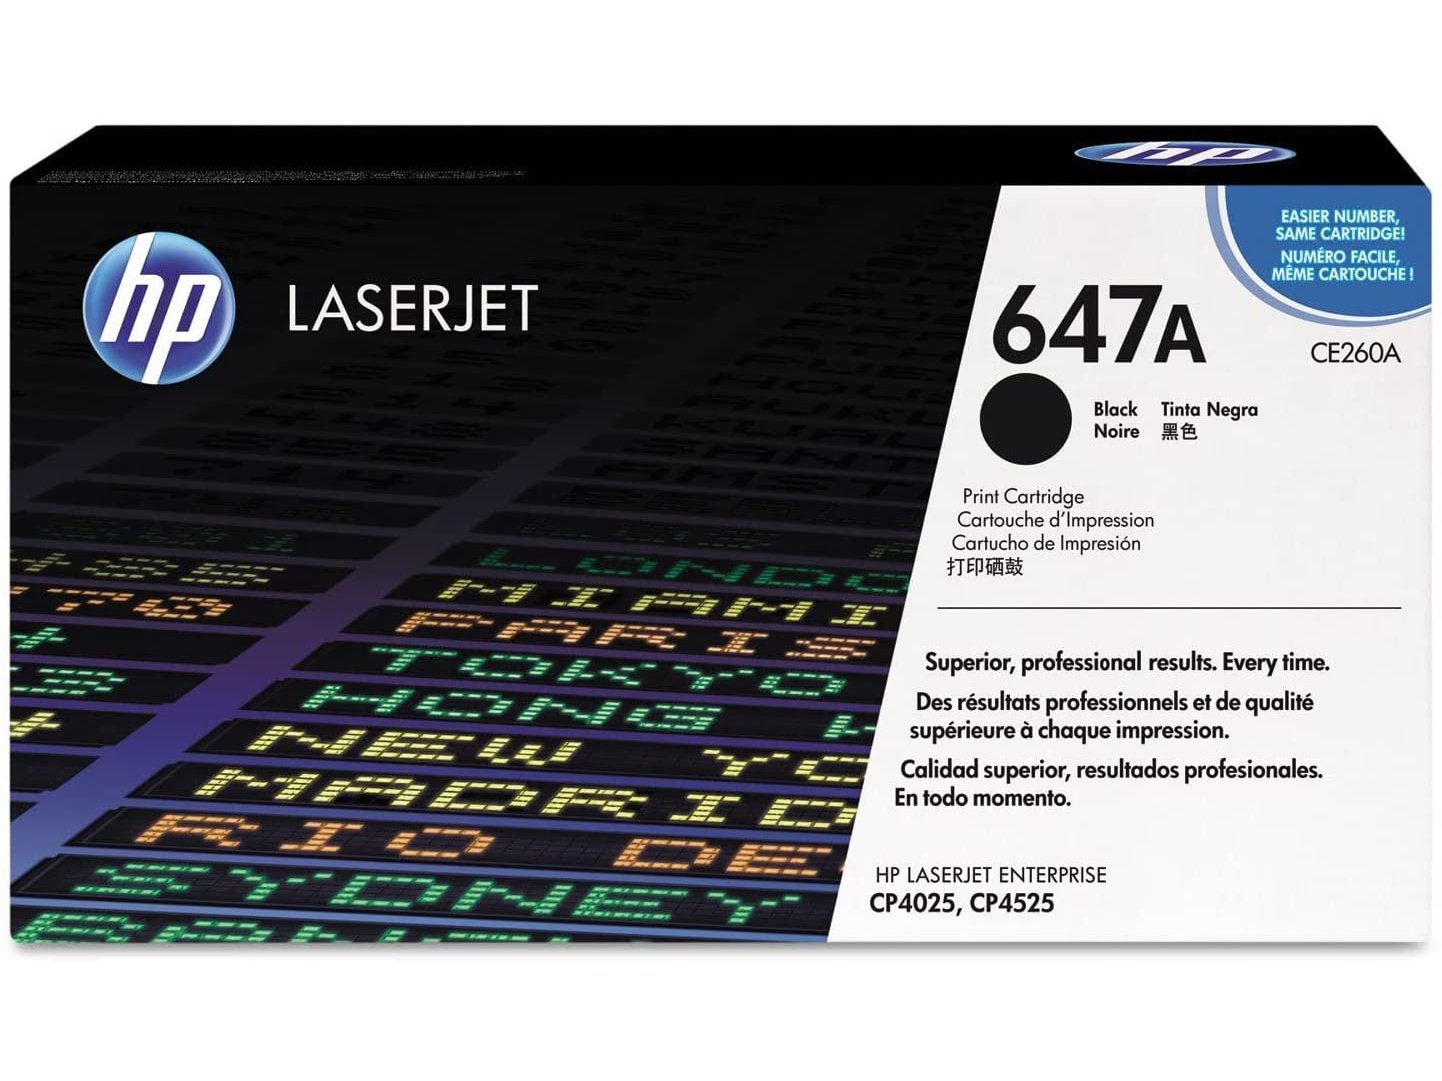 ICU Compatible/ OEM Get HP ICUCE260A Yields 8500 Pages CE260A Black Toner Cartridge - 647A